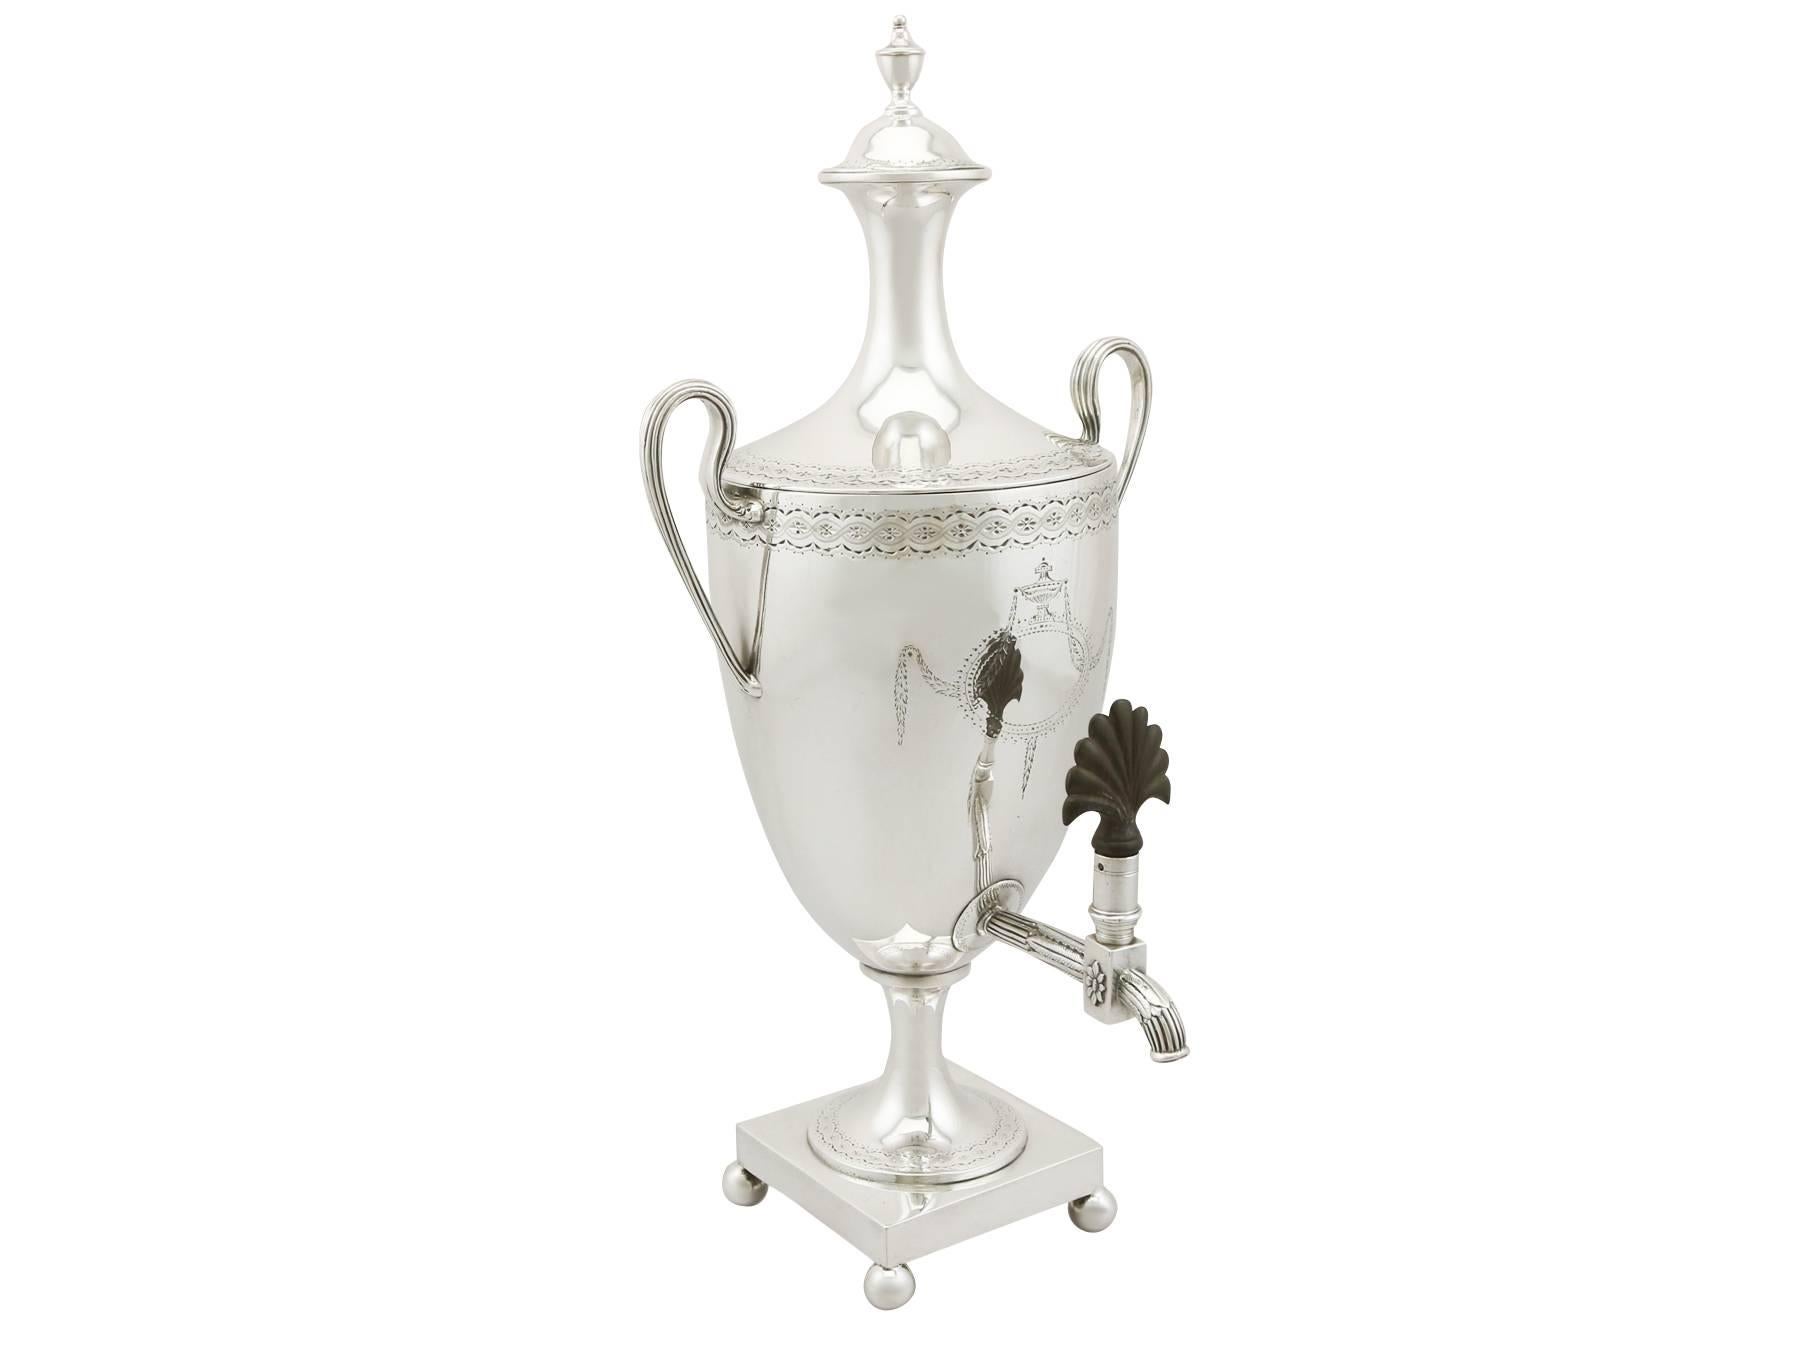 An exceptional, fine and impressive, antique George III English sterling silver samovar; an addition to our Georgian silver teaware collection.

This exceptional antique George III sterling silver samovar has a plain urn shaped form supported by a